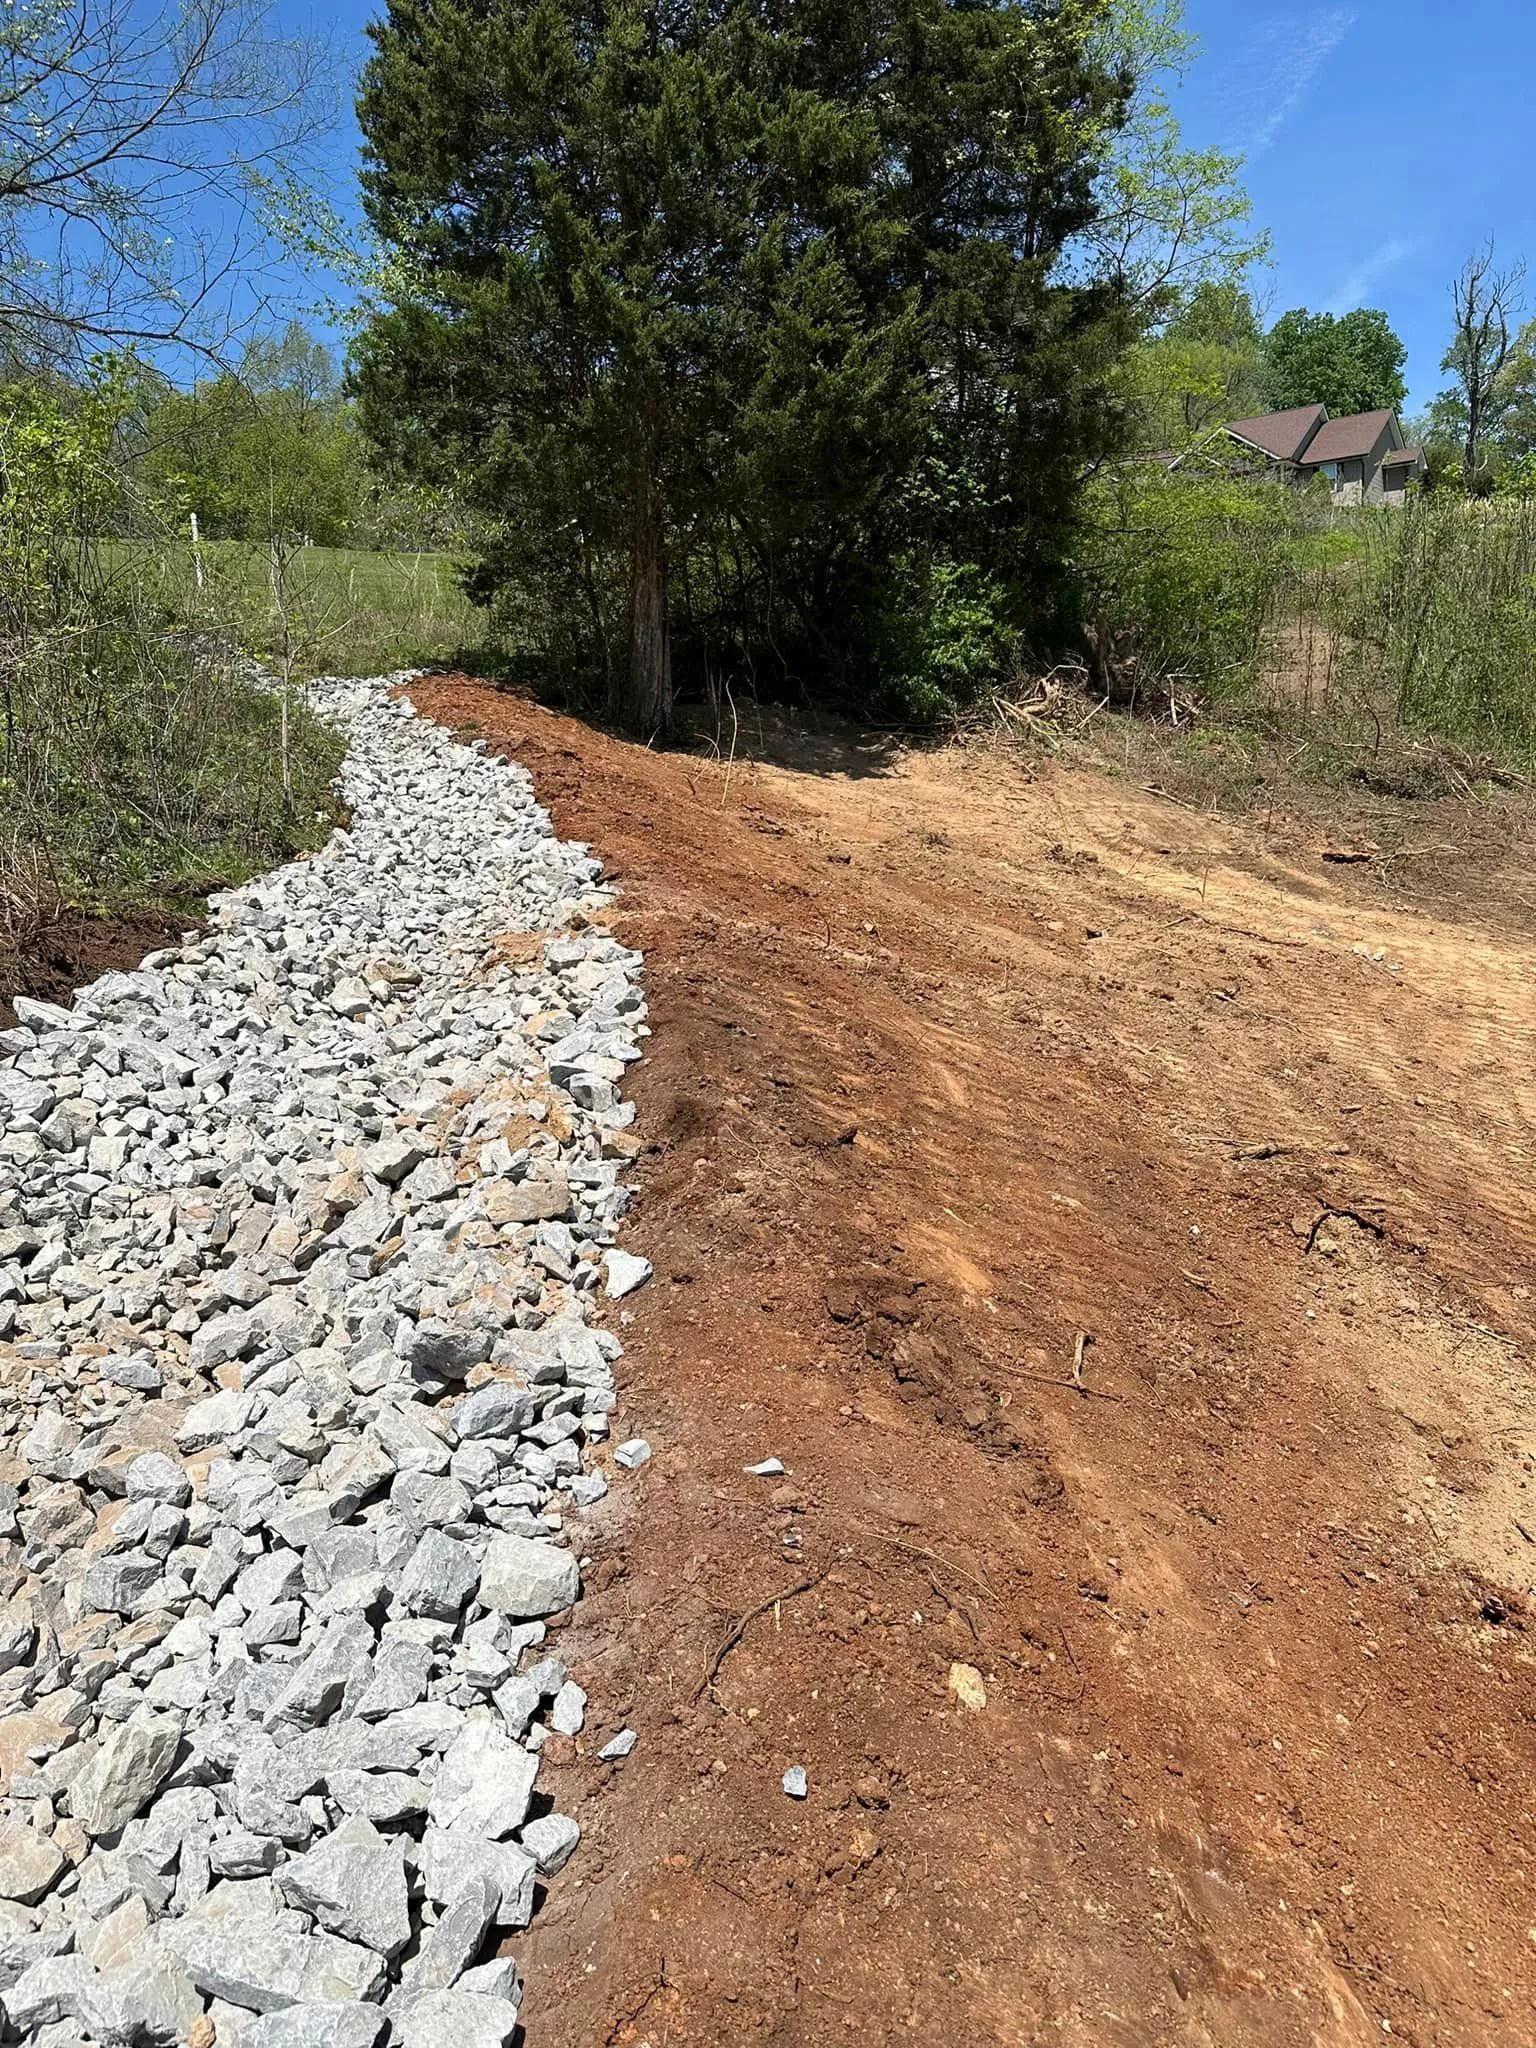 Land Clearing for Wilson Quality Construction  in New Tazewell, TN